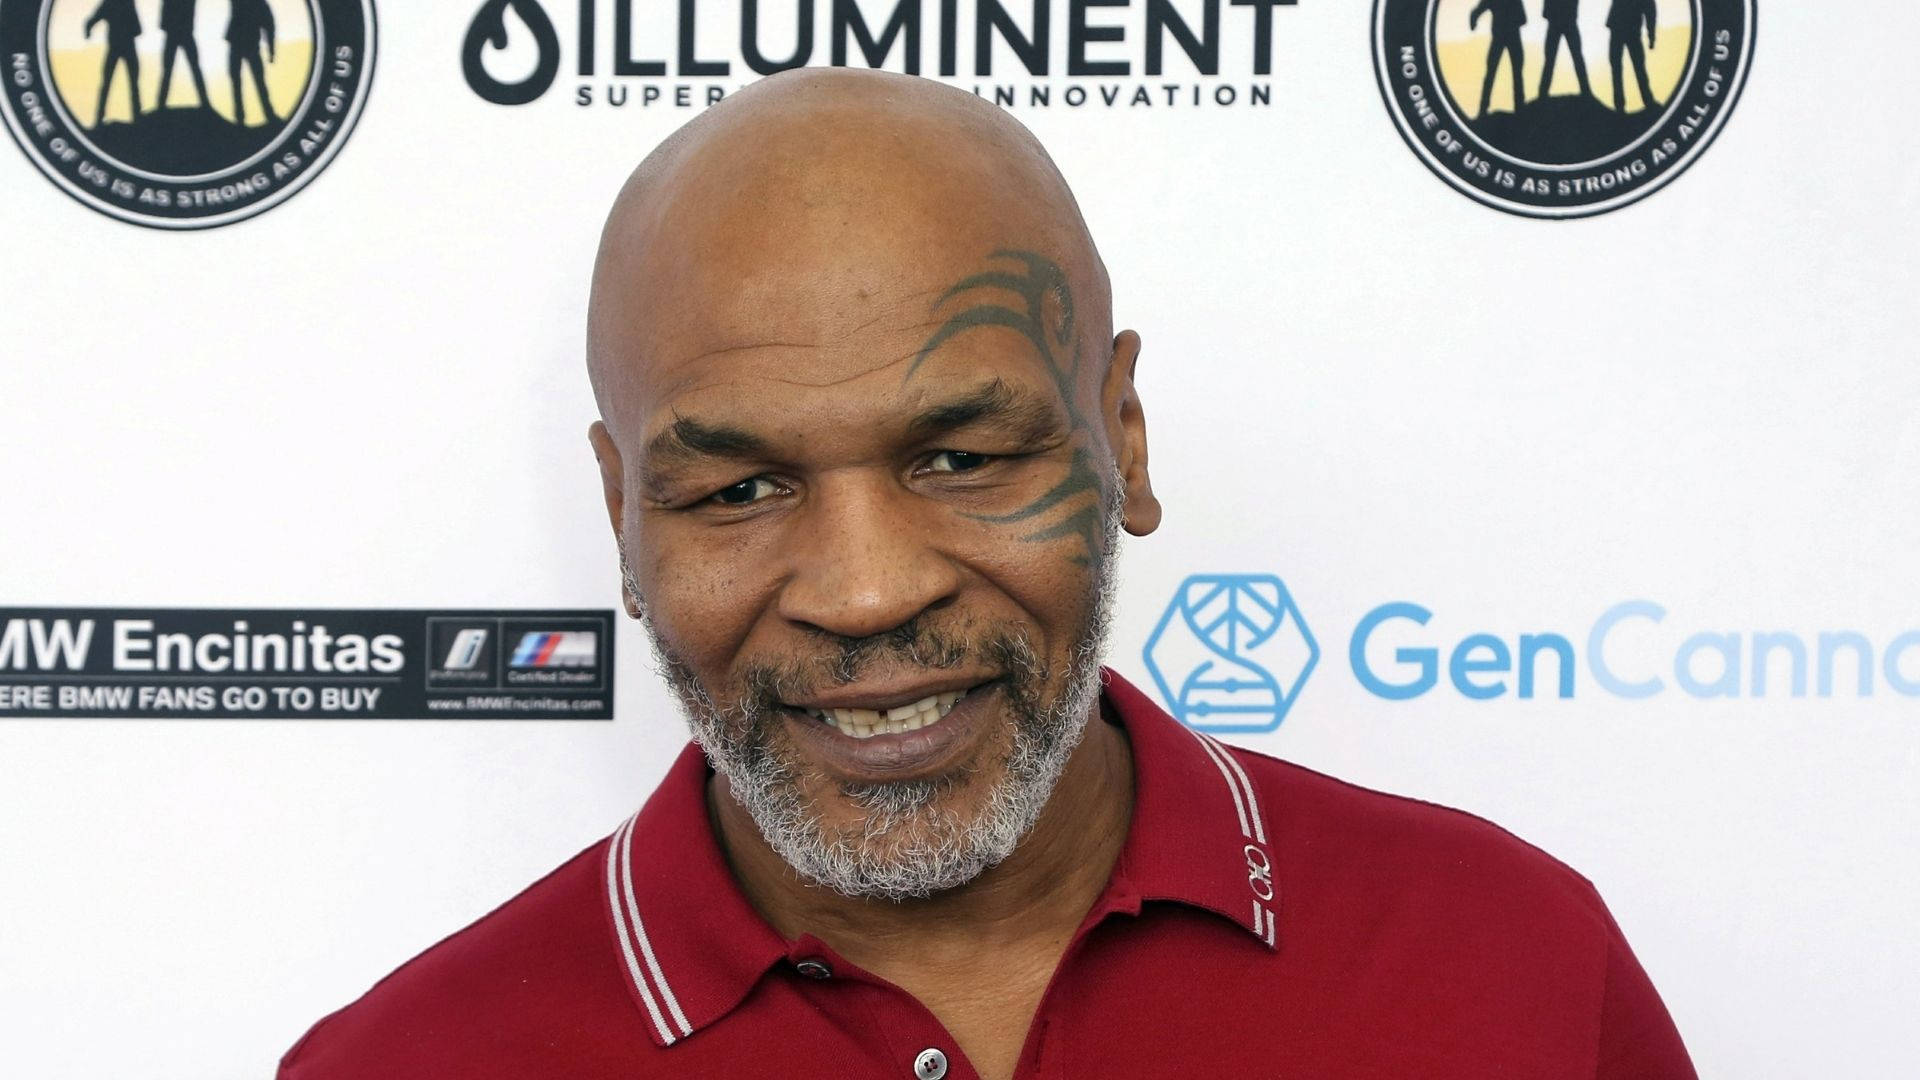 Smiling Mike Tyson Background